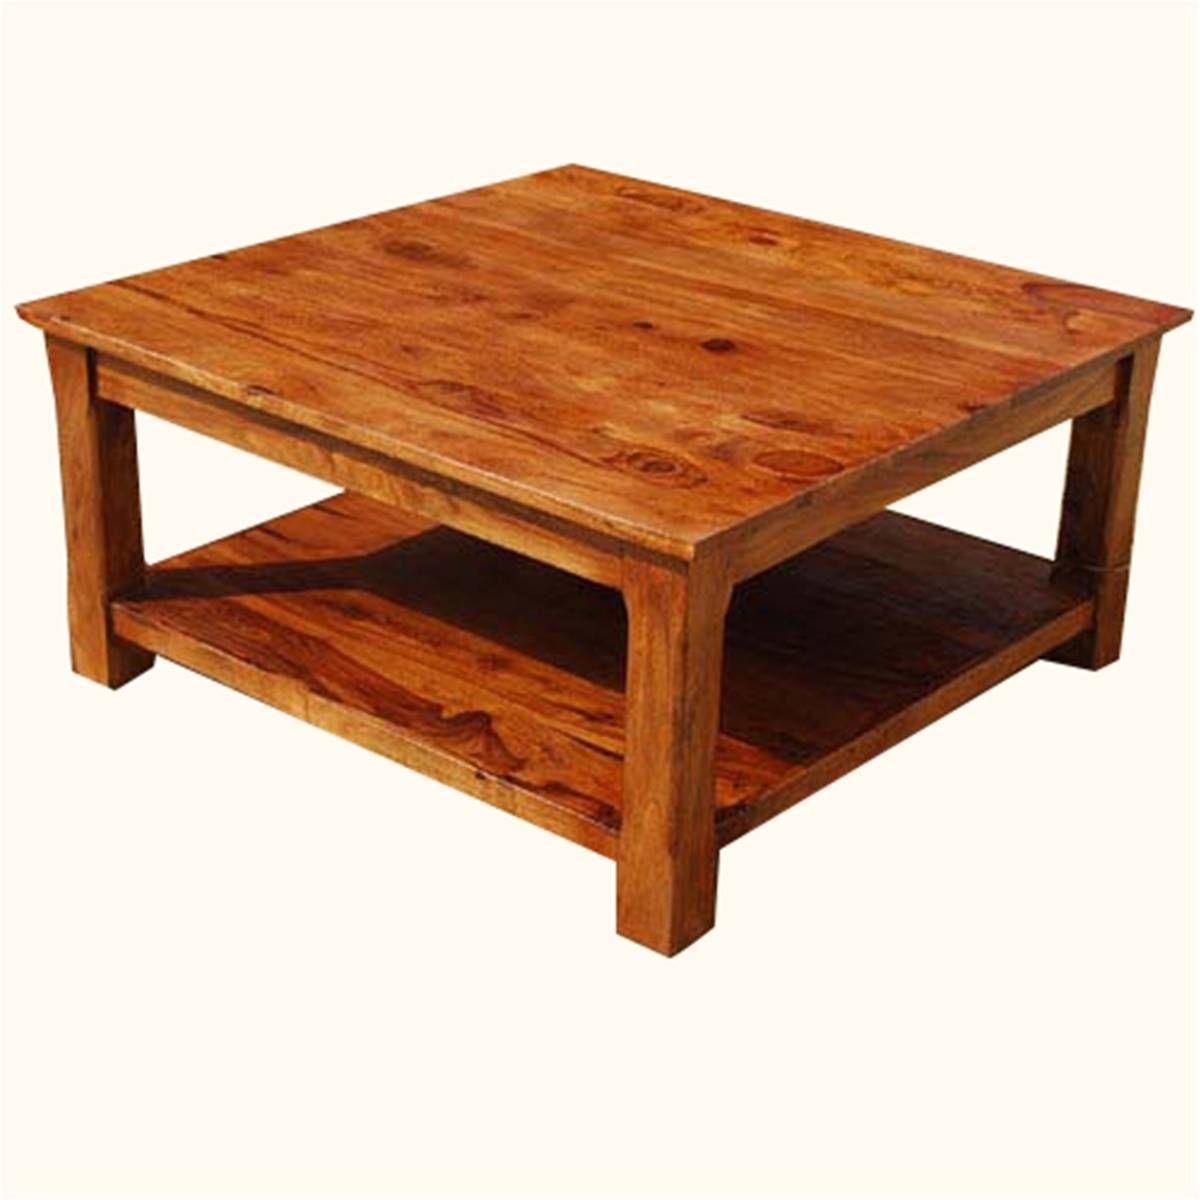 Square Wood Coffee Table For Natural Ambience Of Living Room Pertaining To Square Wooden Coffee Tables (View 9 of 30)